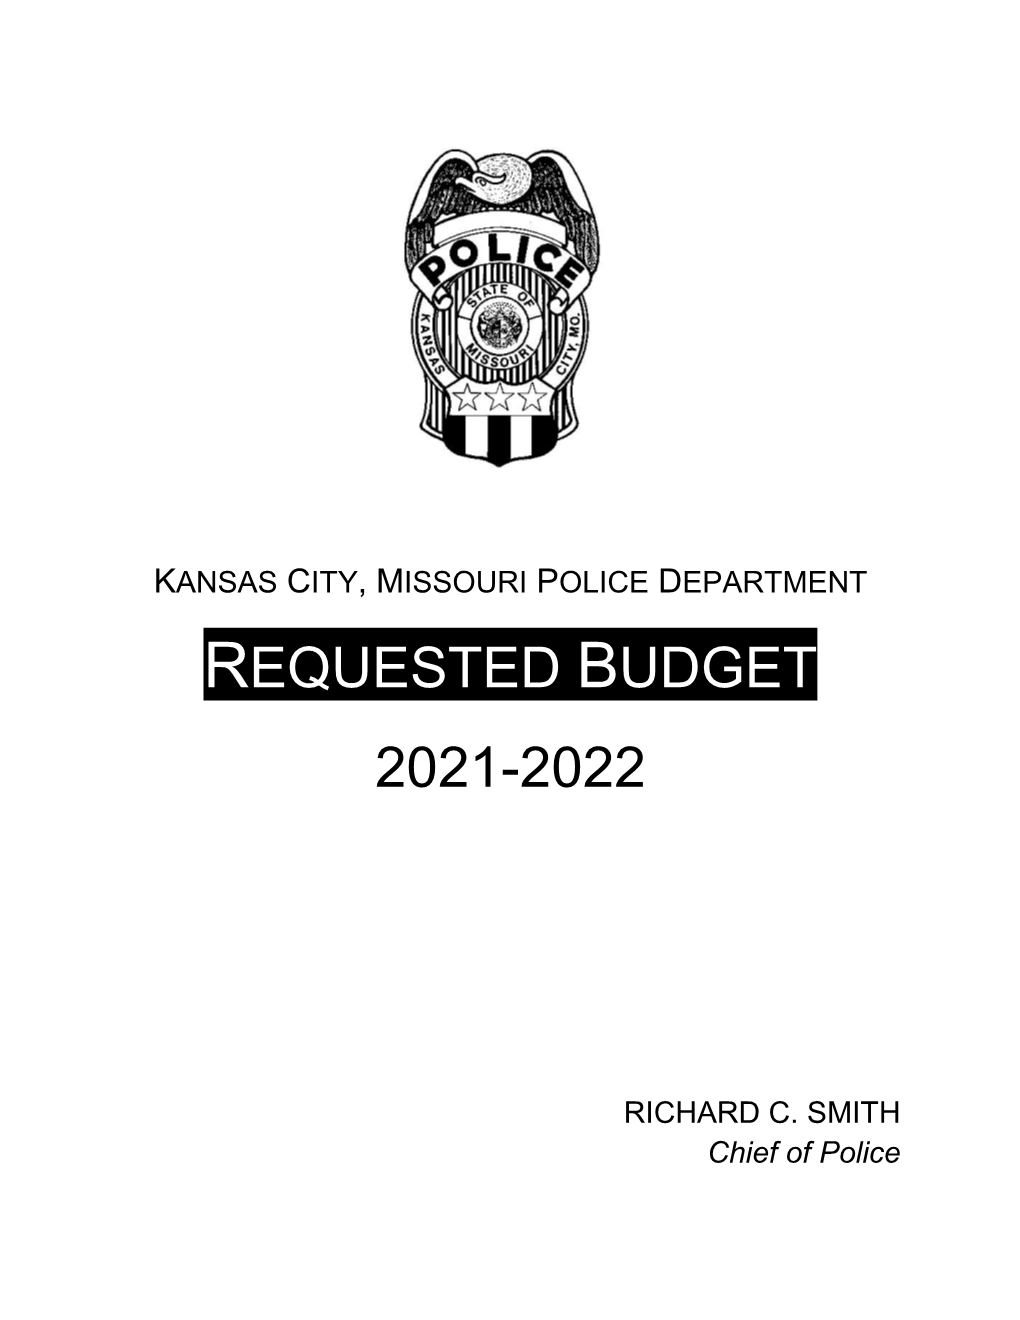 Requested Budget for Fiscal Year 2021-2022